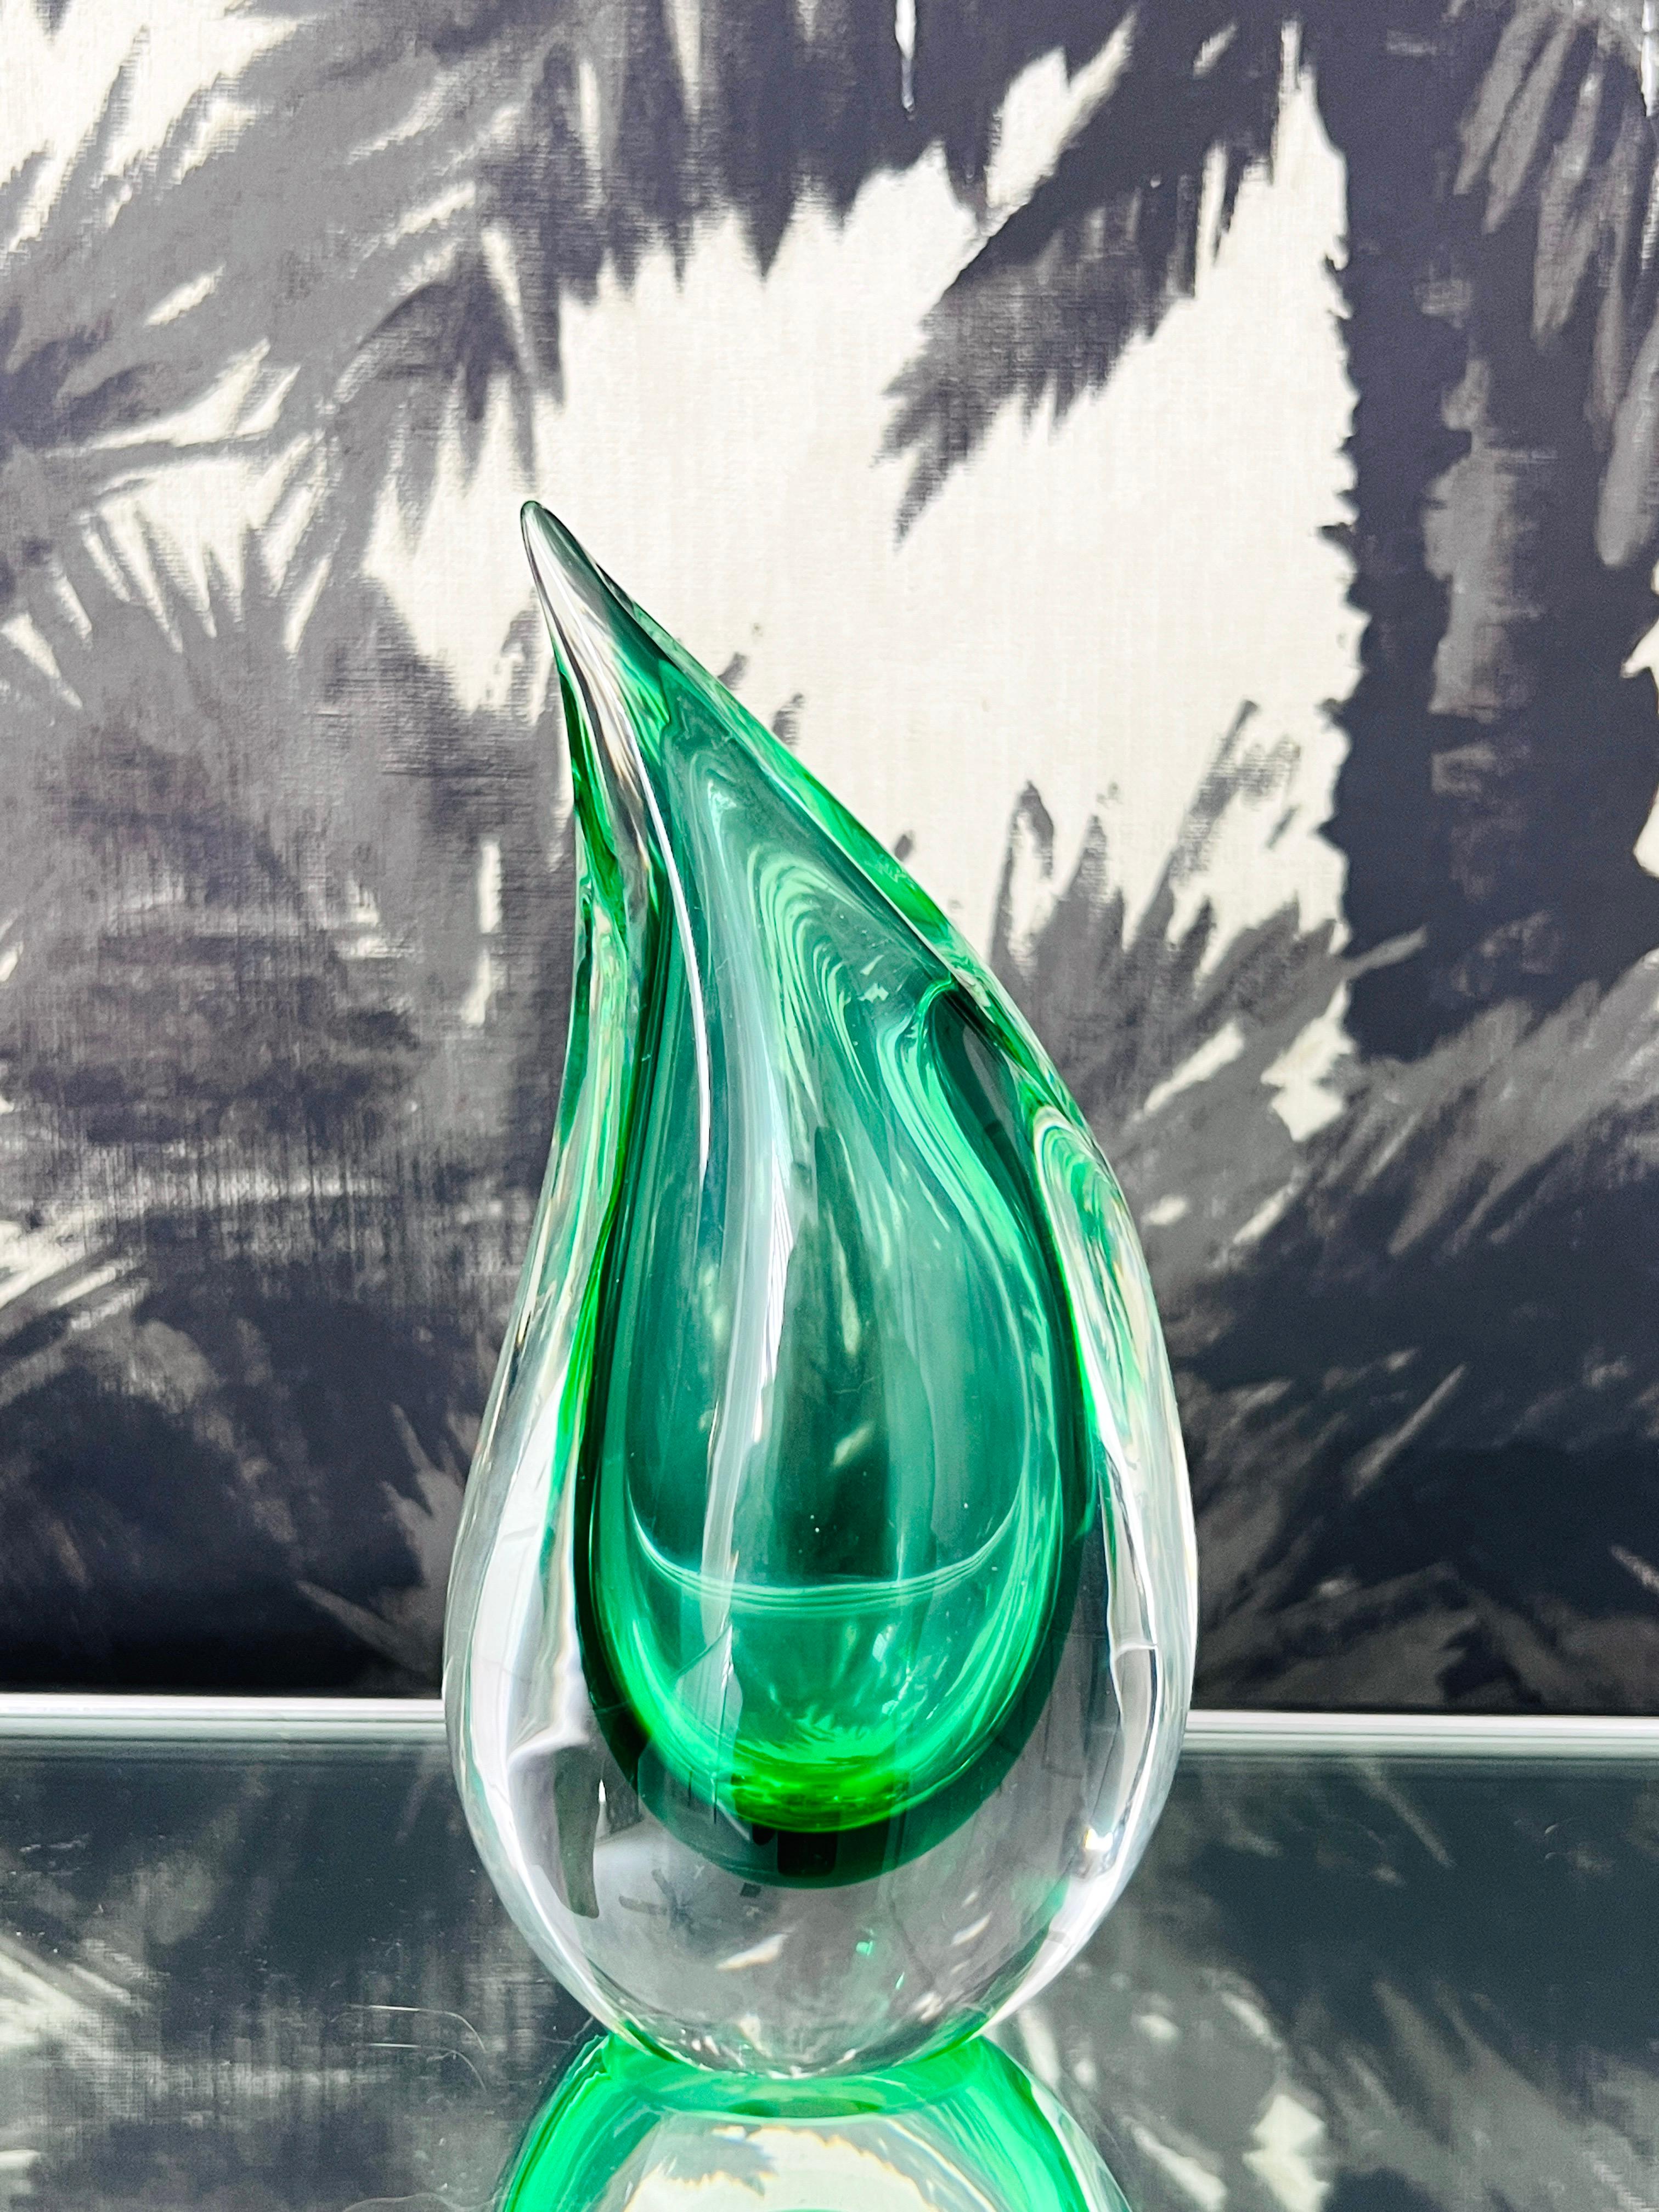 Italian Green Murano Glass Bud Vase with Flame Tip Design by Luigi Onesto, 1970's Signed